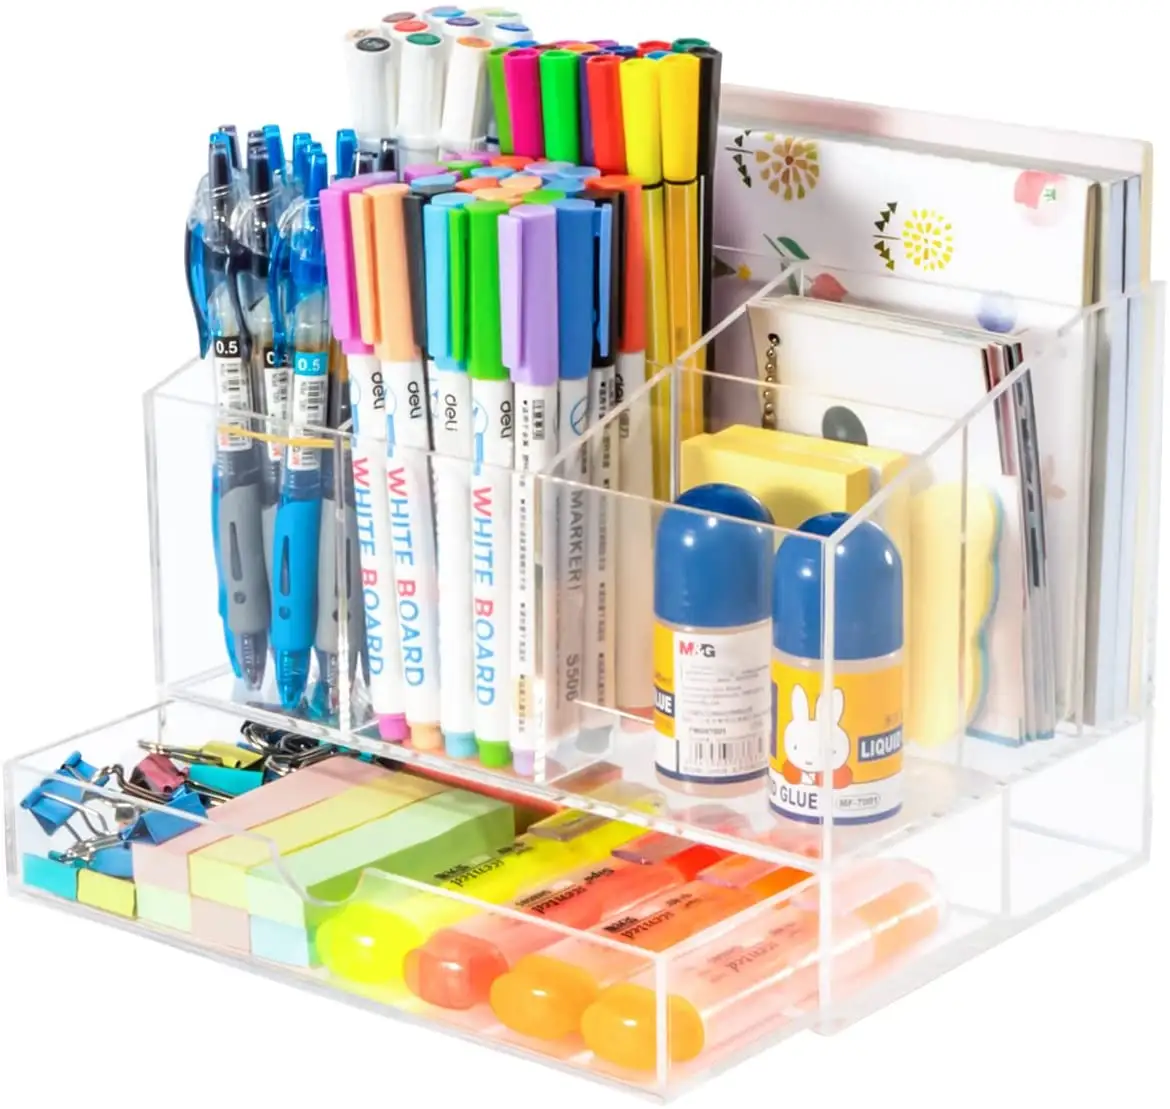 Clear Acrylic Pen Organizer, Multi-Functional Desk Pen Holder Stationery Storage Case with 7 Compartment, 1 Bottom Drawer